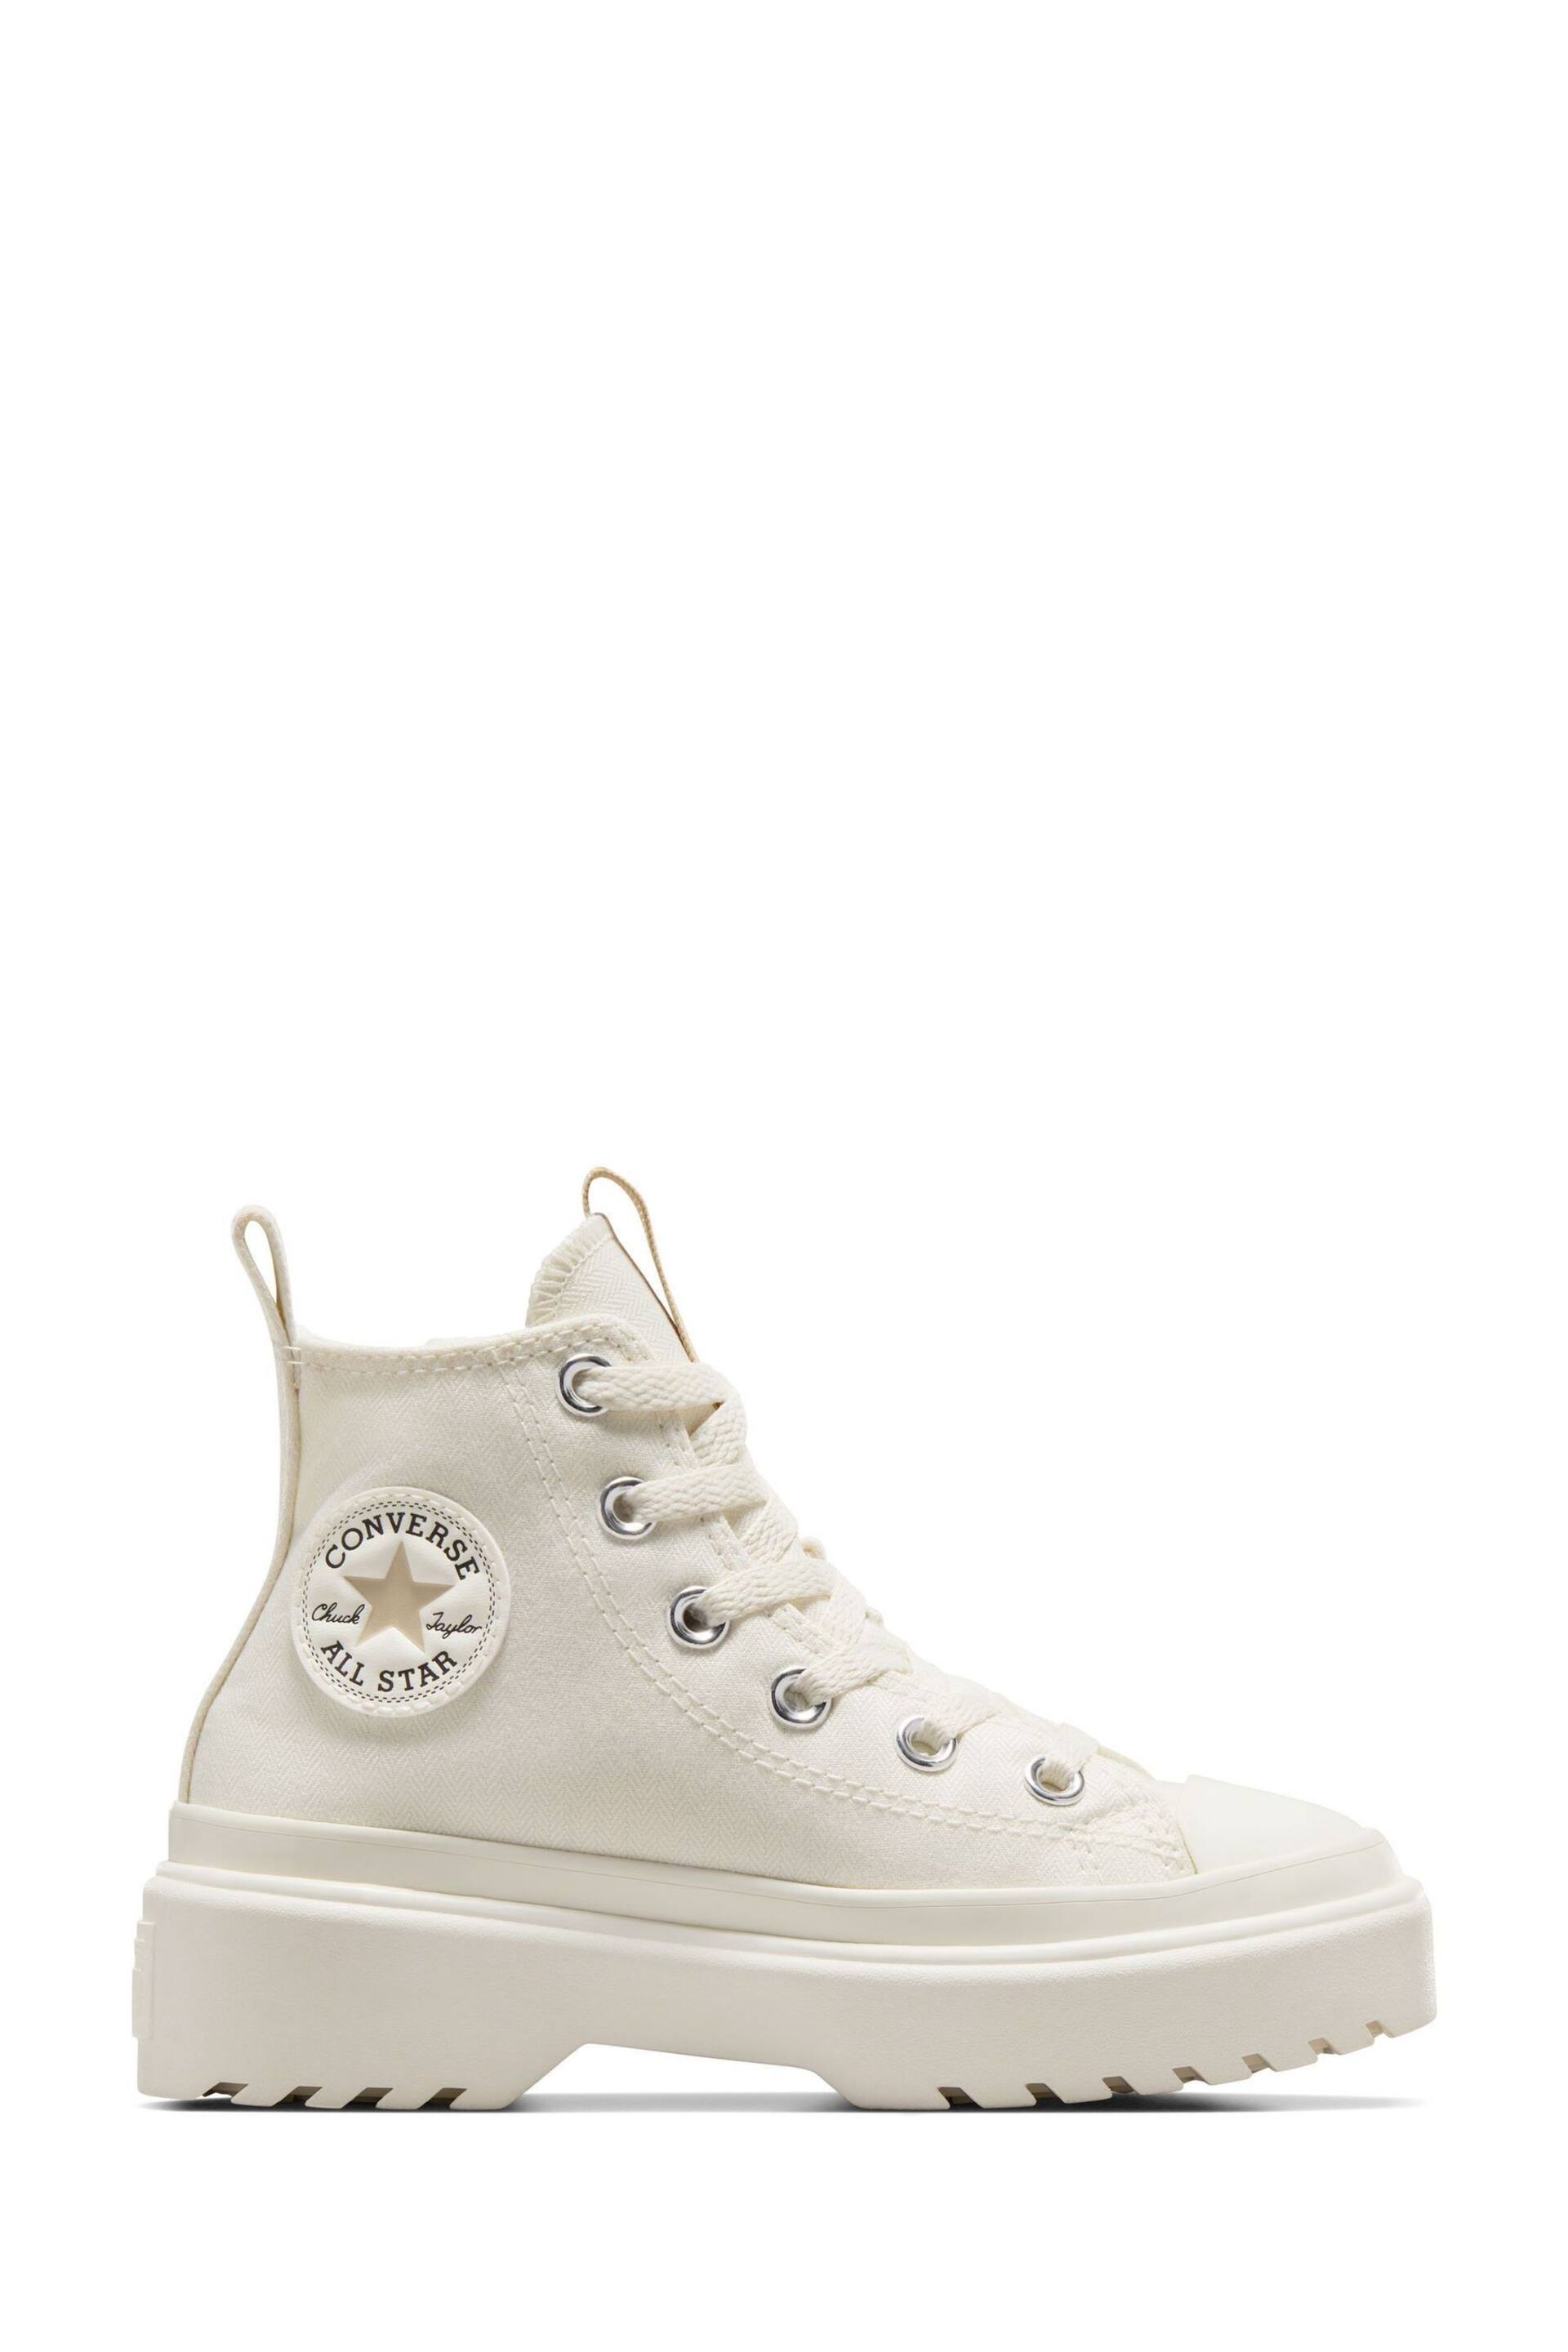 Converse Cream Lugged Lift Junior Trainers - Image 1 of 10